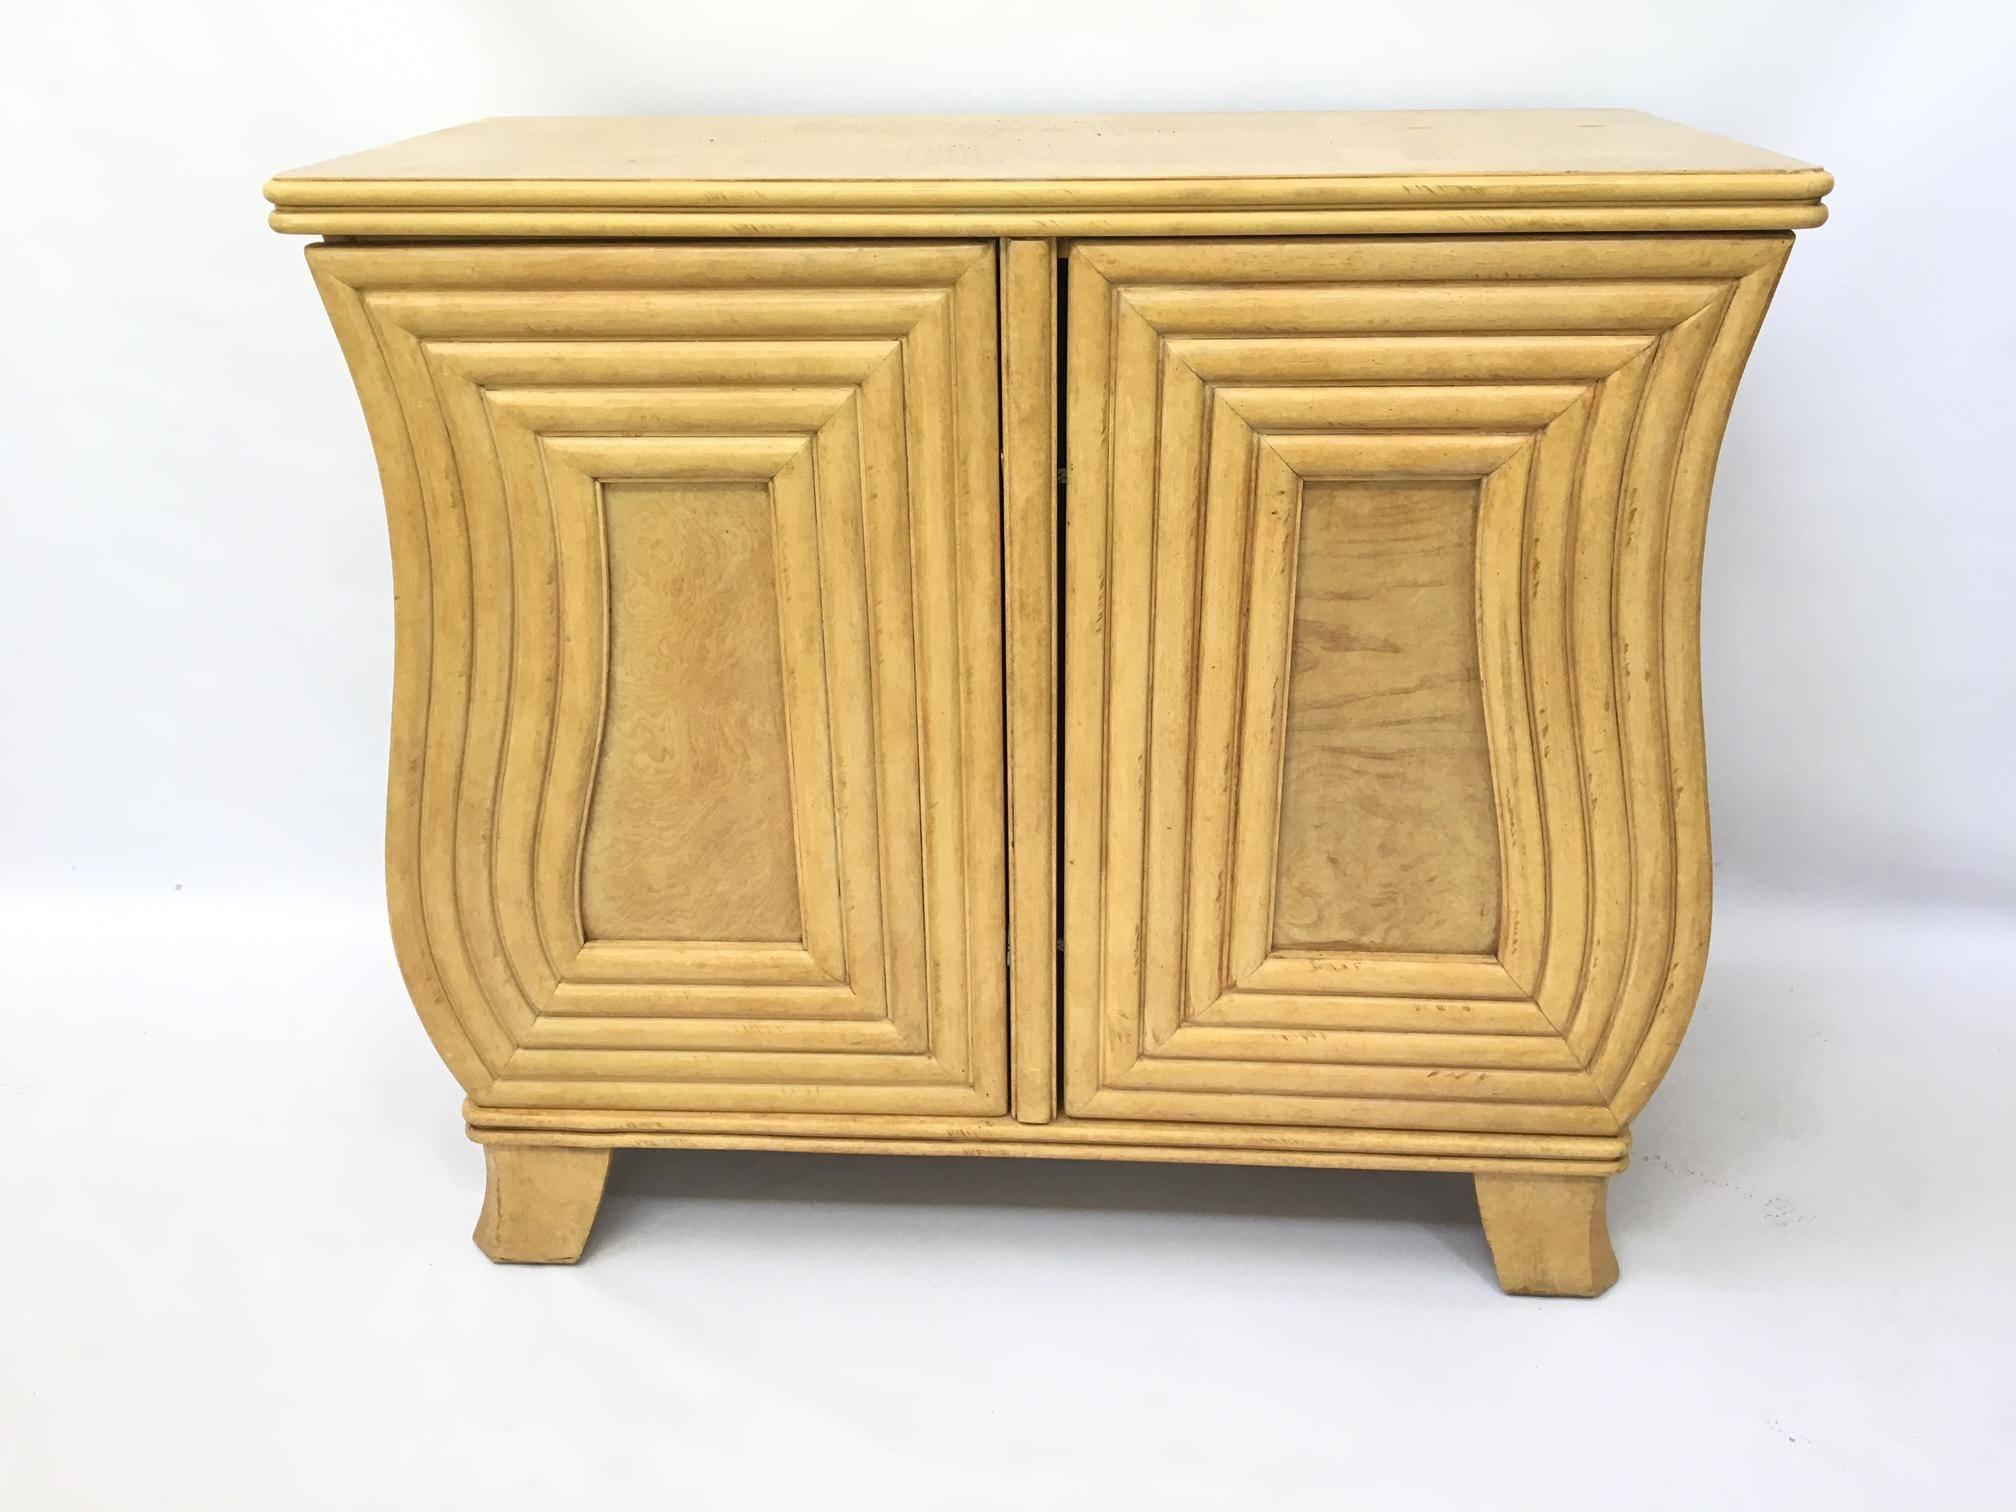 Mid-Century Modern cabinet. Features a unique curved front design with two individual doors that open opposite each other. Doors open to reveal two large storage spaces. Doors are complimented by a modern take on a split reed bamboo or rattan trim.